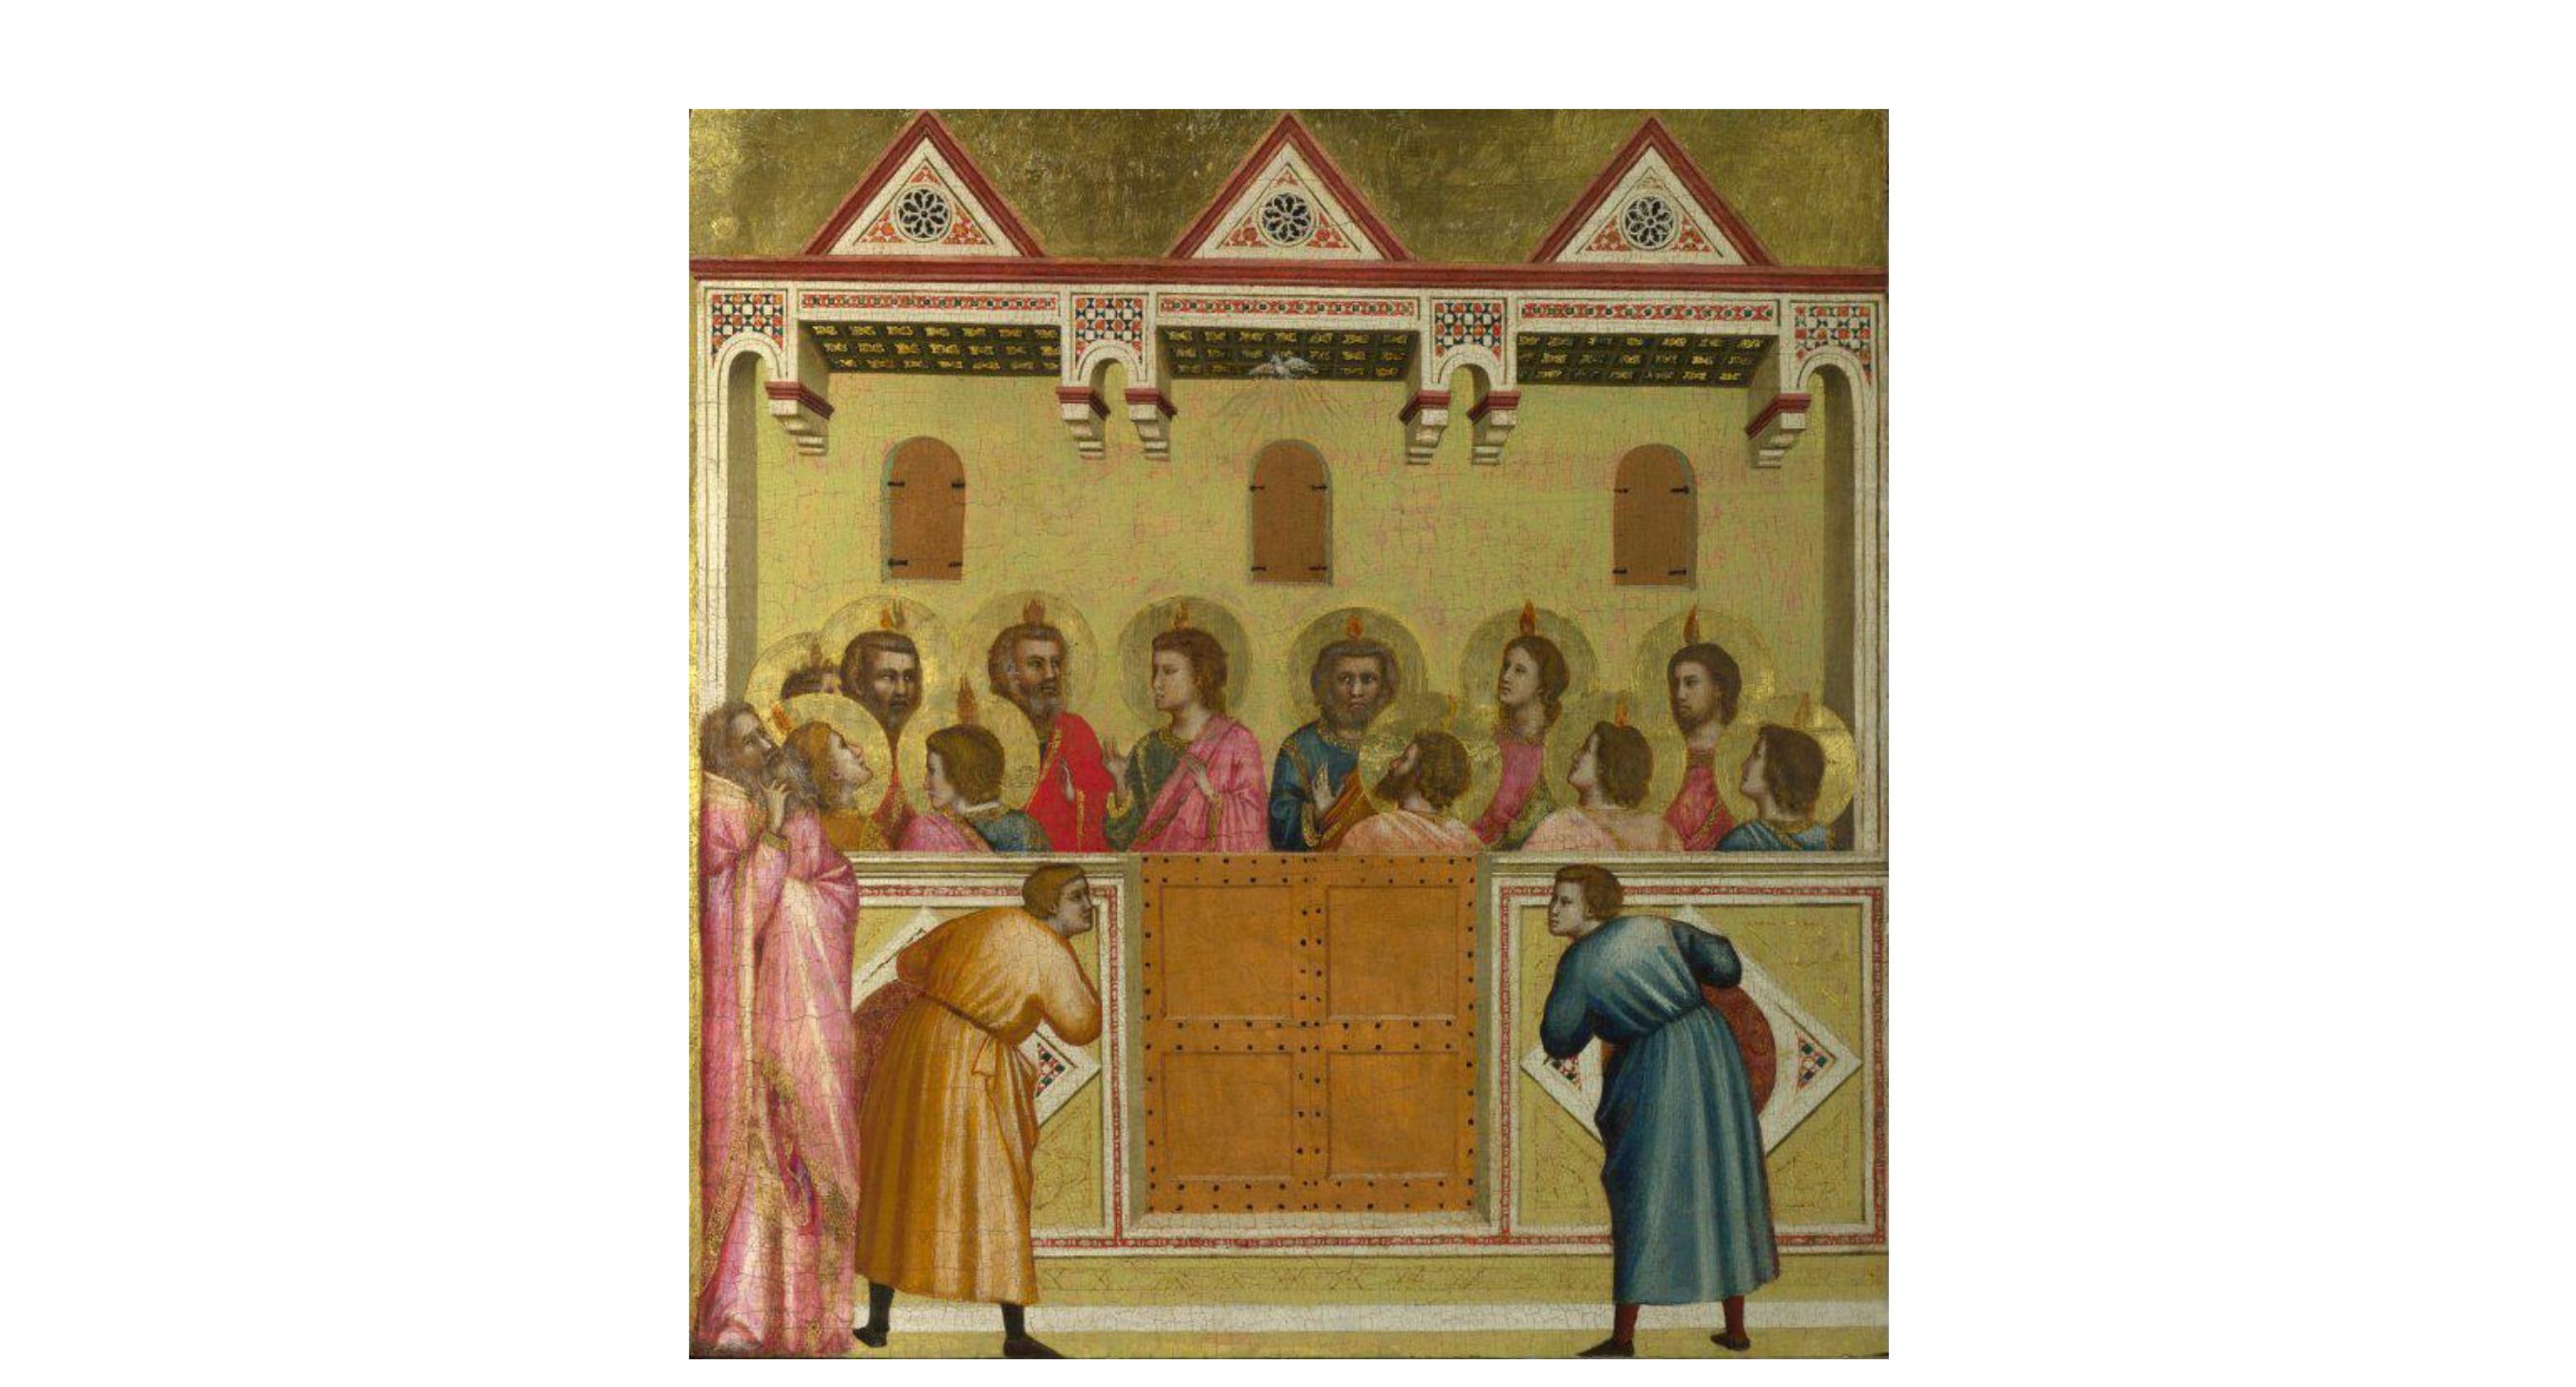 Giotto - Pentecôte - wicommons CC http://www.nationalgallery.org.uk/paintings/giotto-and-workshop-pentecost